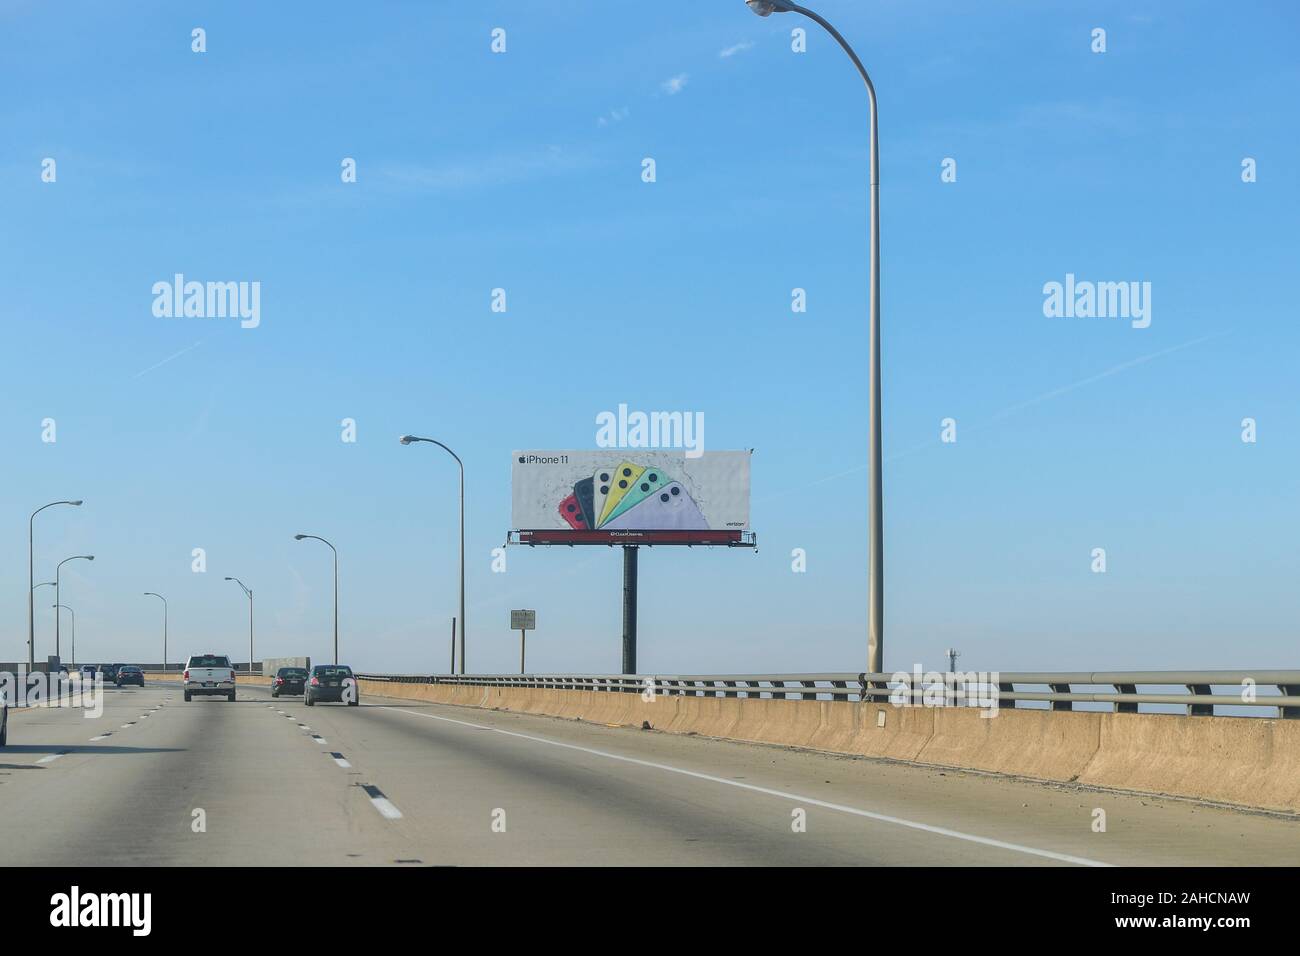 New Jersey December 26, 2019: A billboard advertising the iPhone 11 pro which on the highway - Image Stock Photo